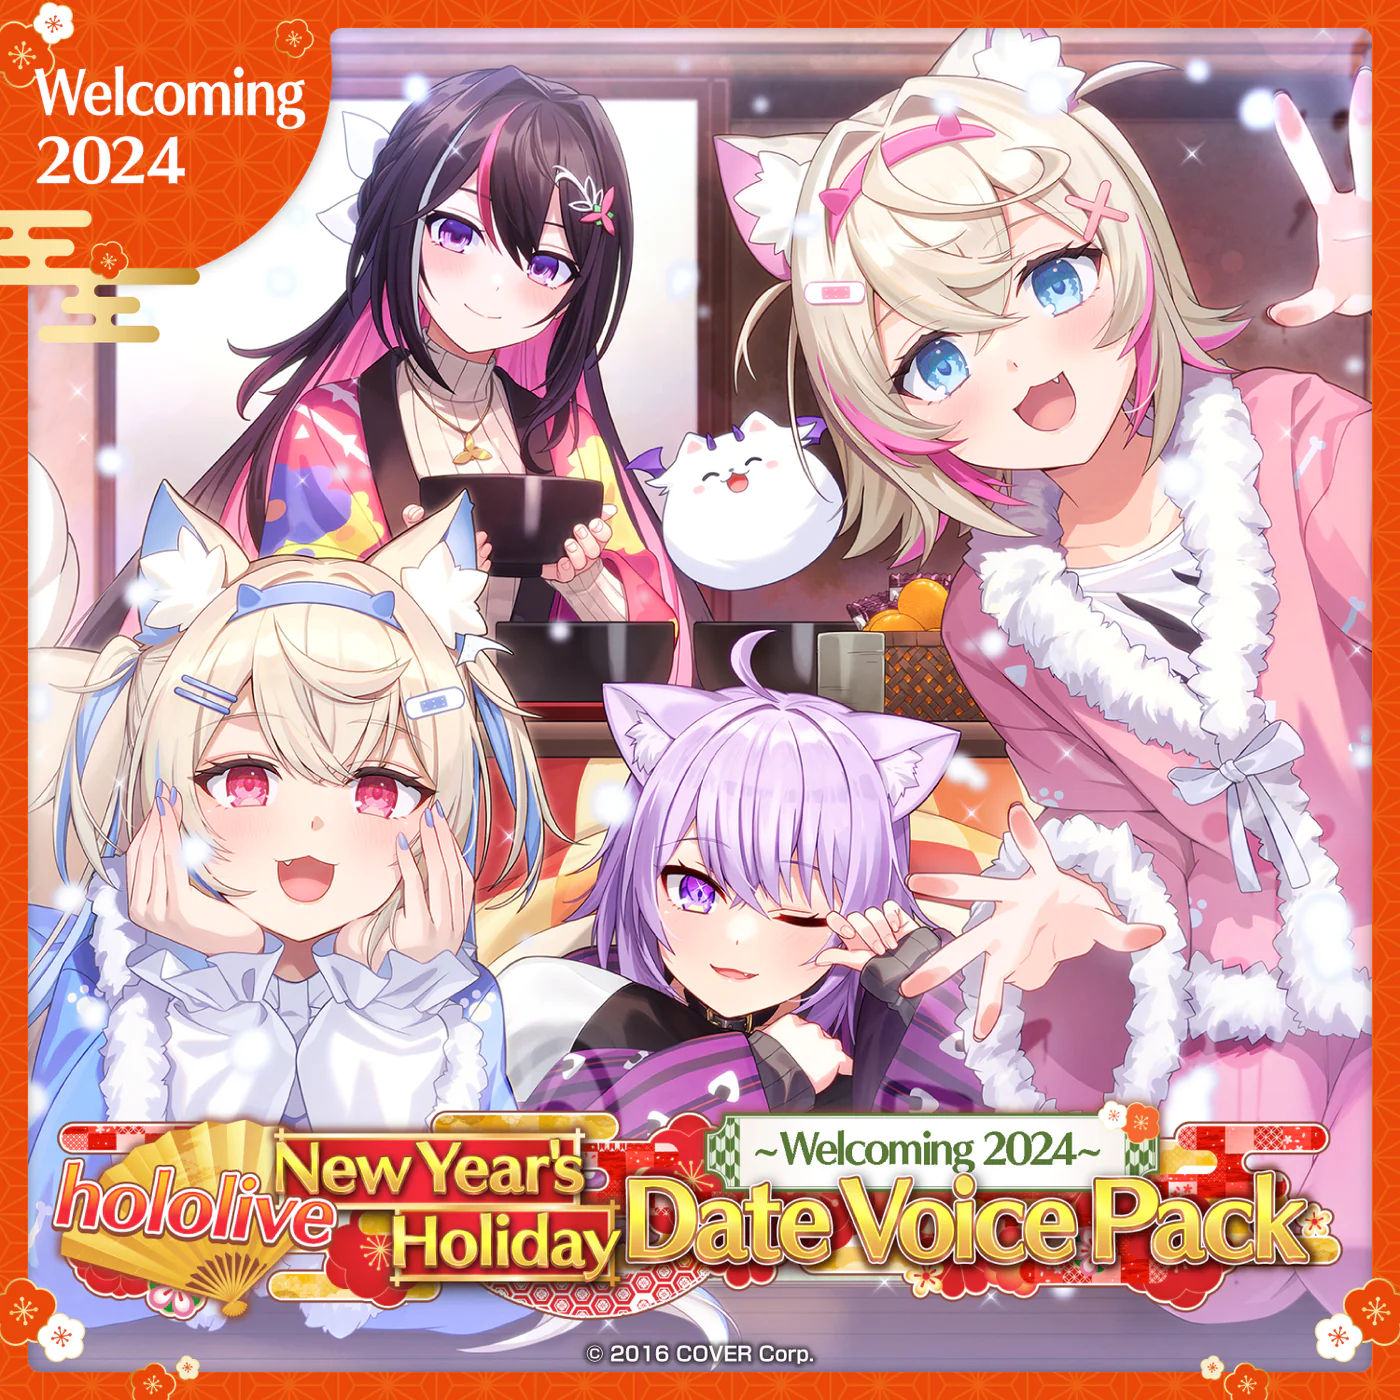 [In Stock] hololive New Year's Holiday Date Voice Pack ~Welcoming 2024~ English